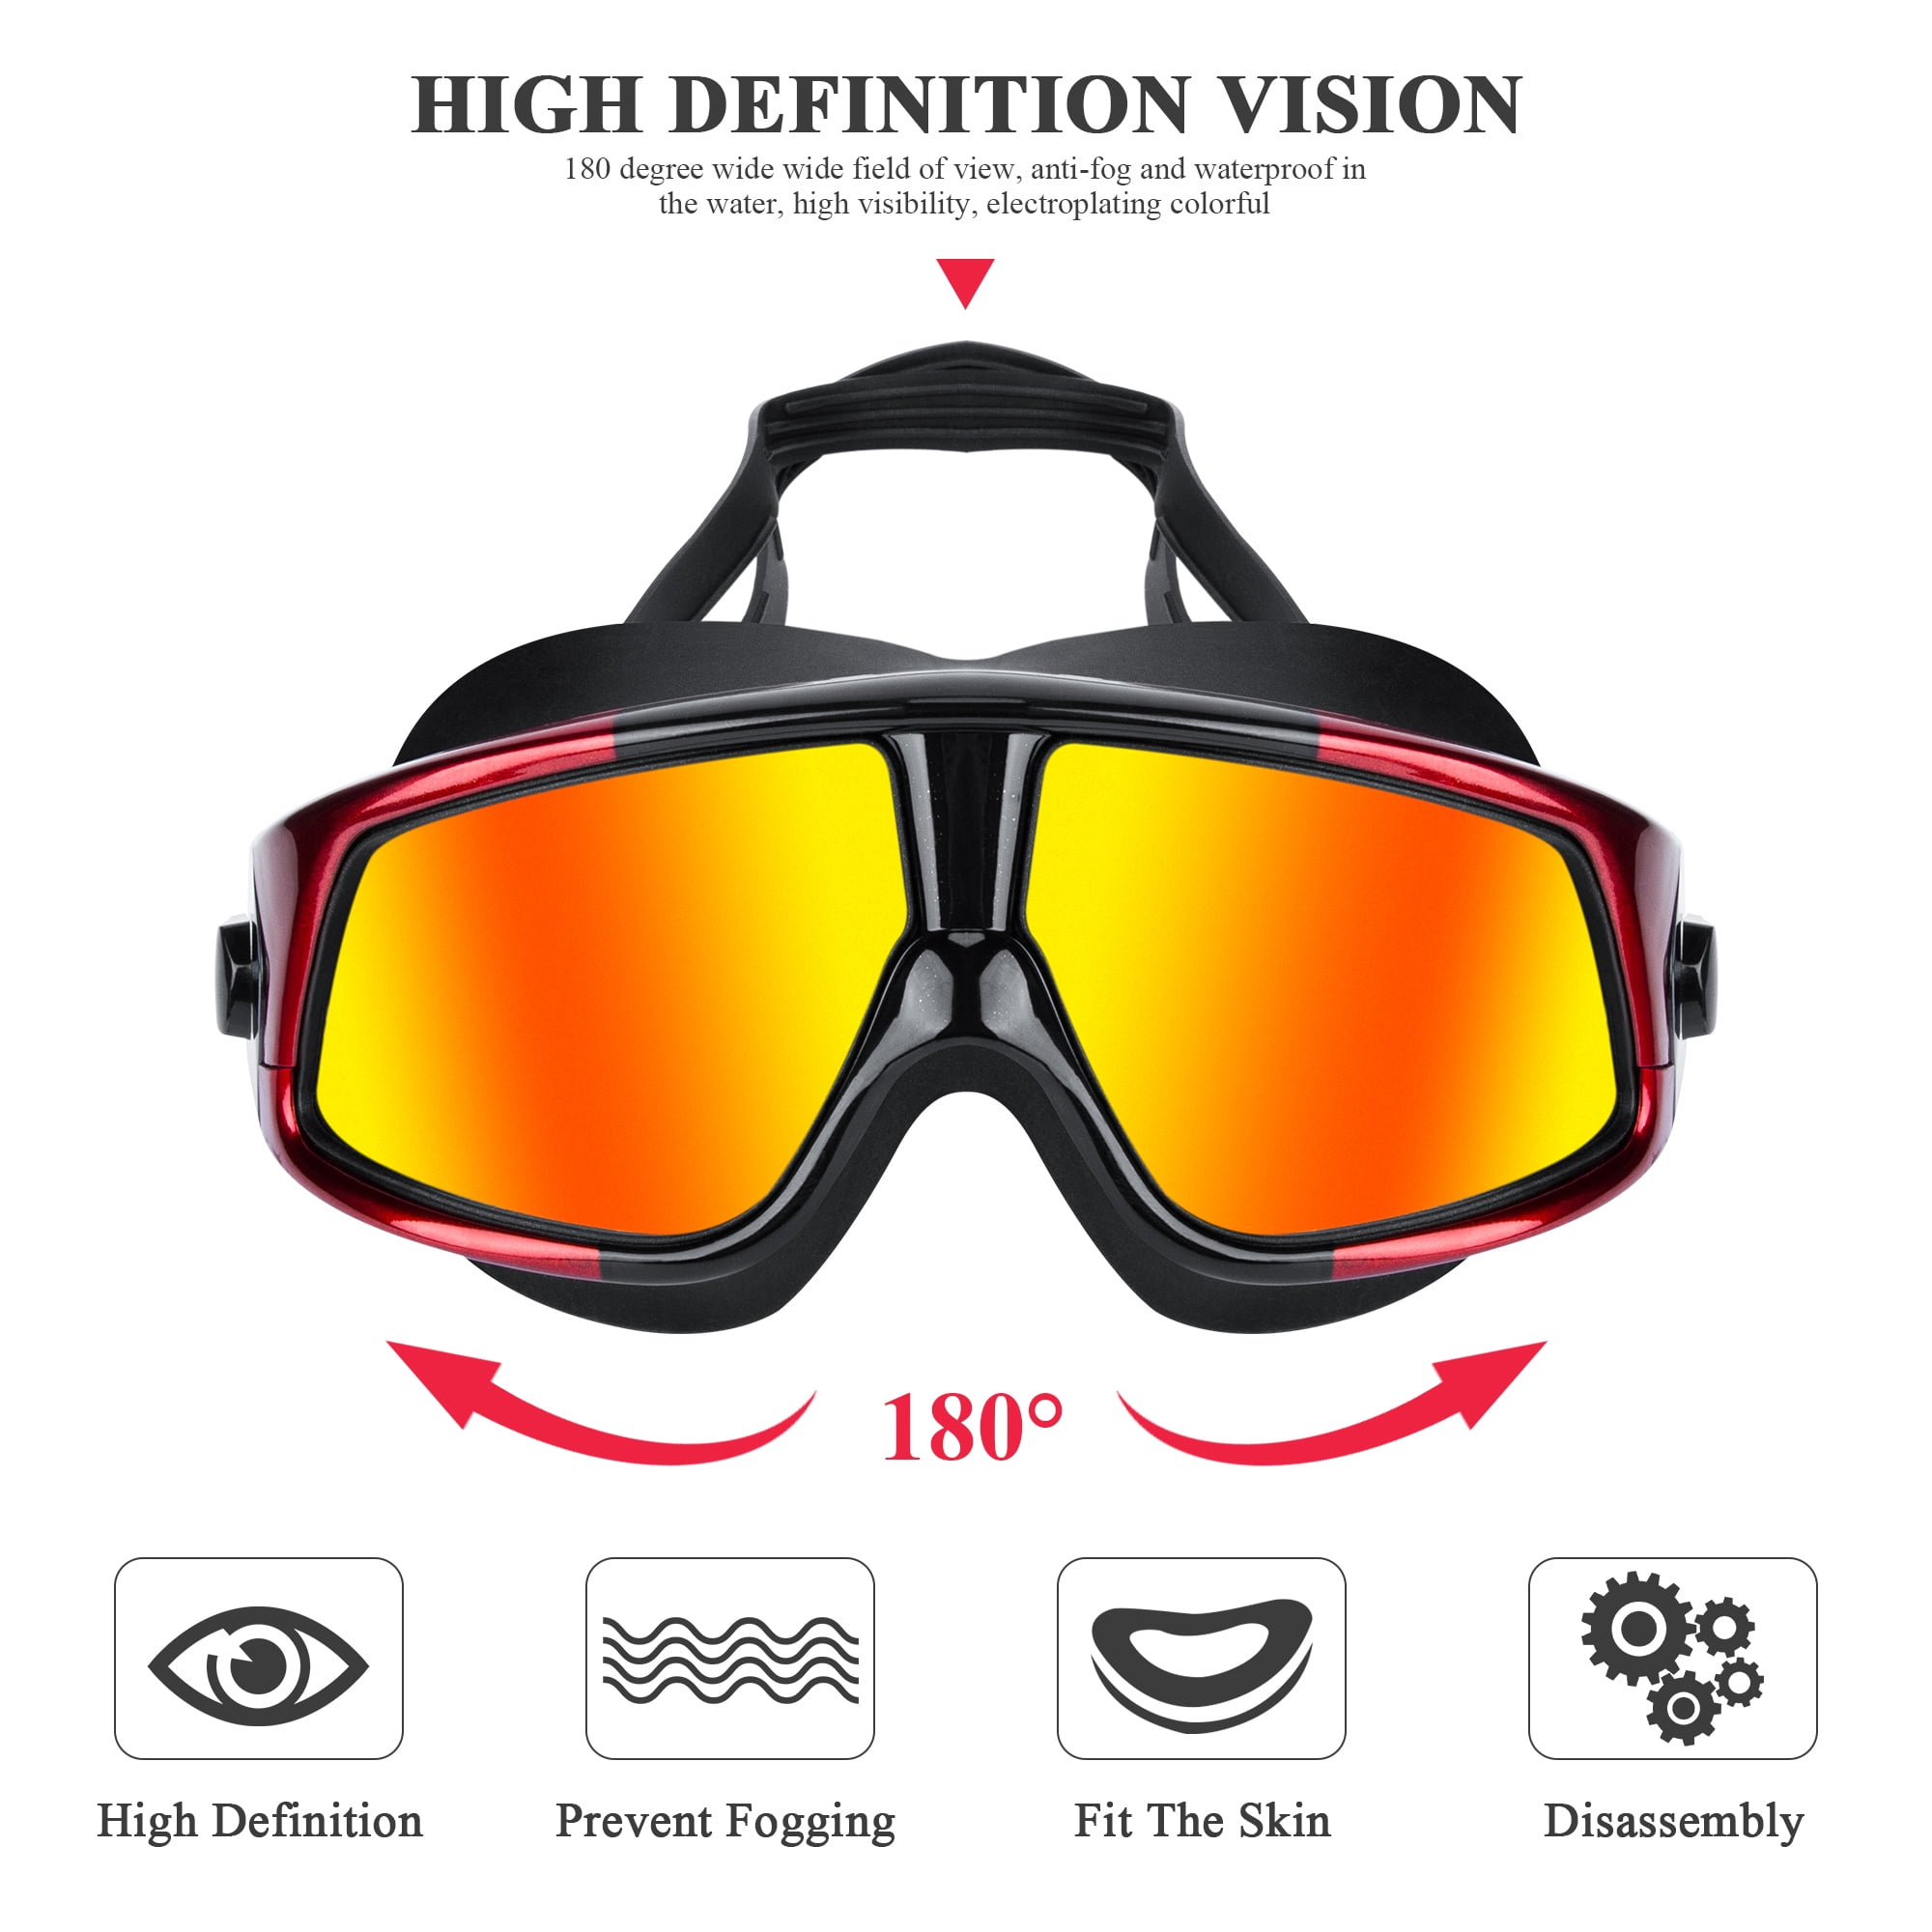 Swimming Goggles Anti Fog No Leaking with UV Protection and Clear Lens Wide-Vision for Men Women Adult Youth with Free Case,Nose Clip and Ear Plugs Premium Polarized Big Large Frame Swim Goggles 